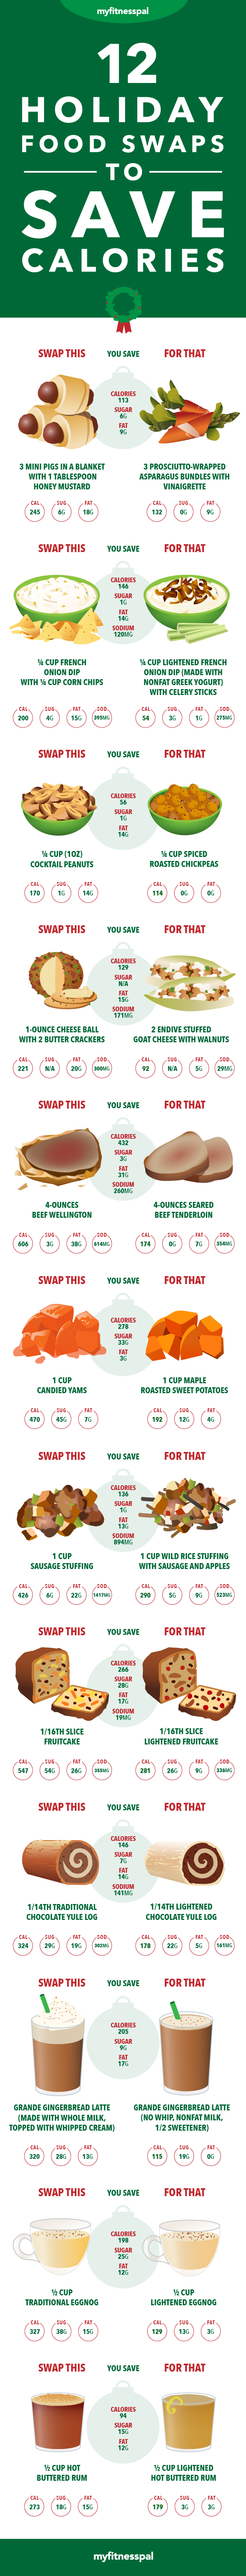 12 Holiday Food Swaps Final (1)